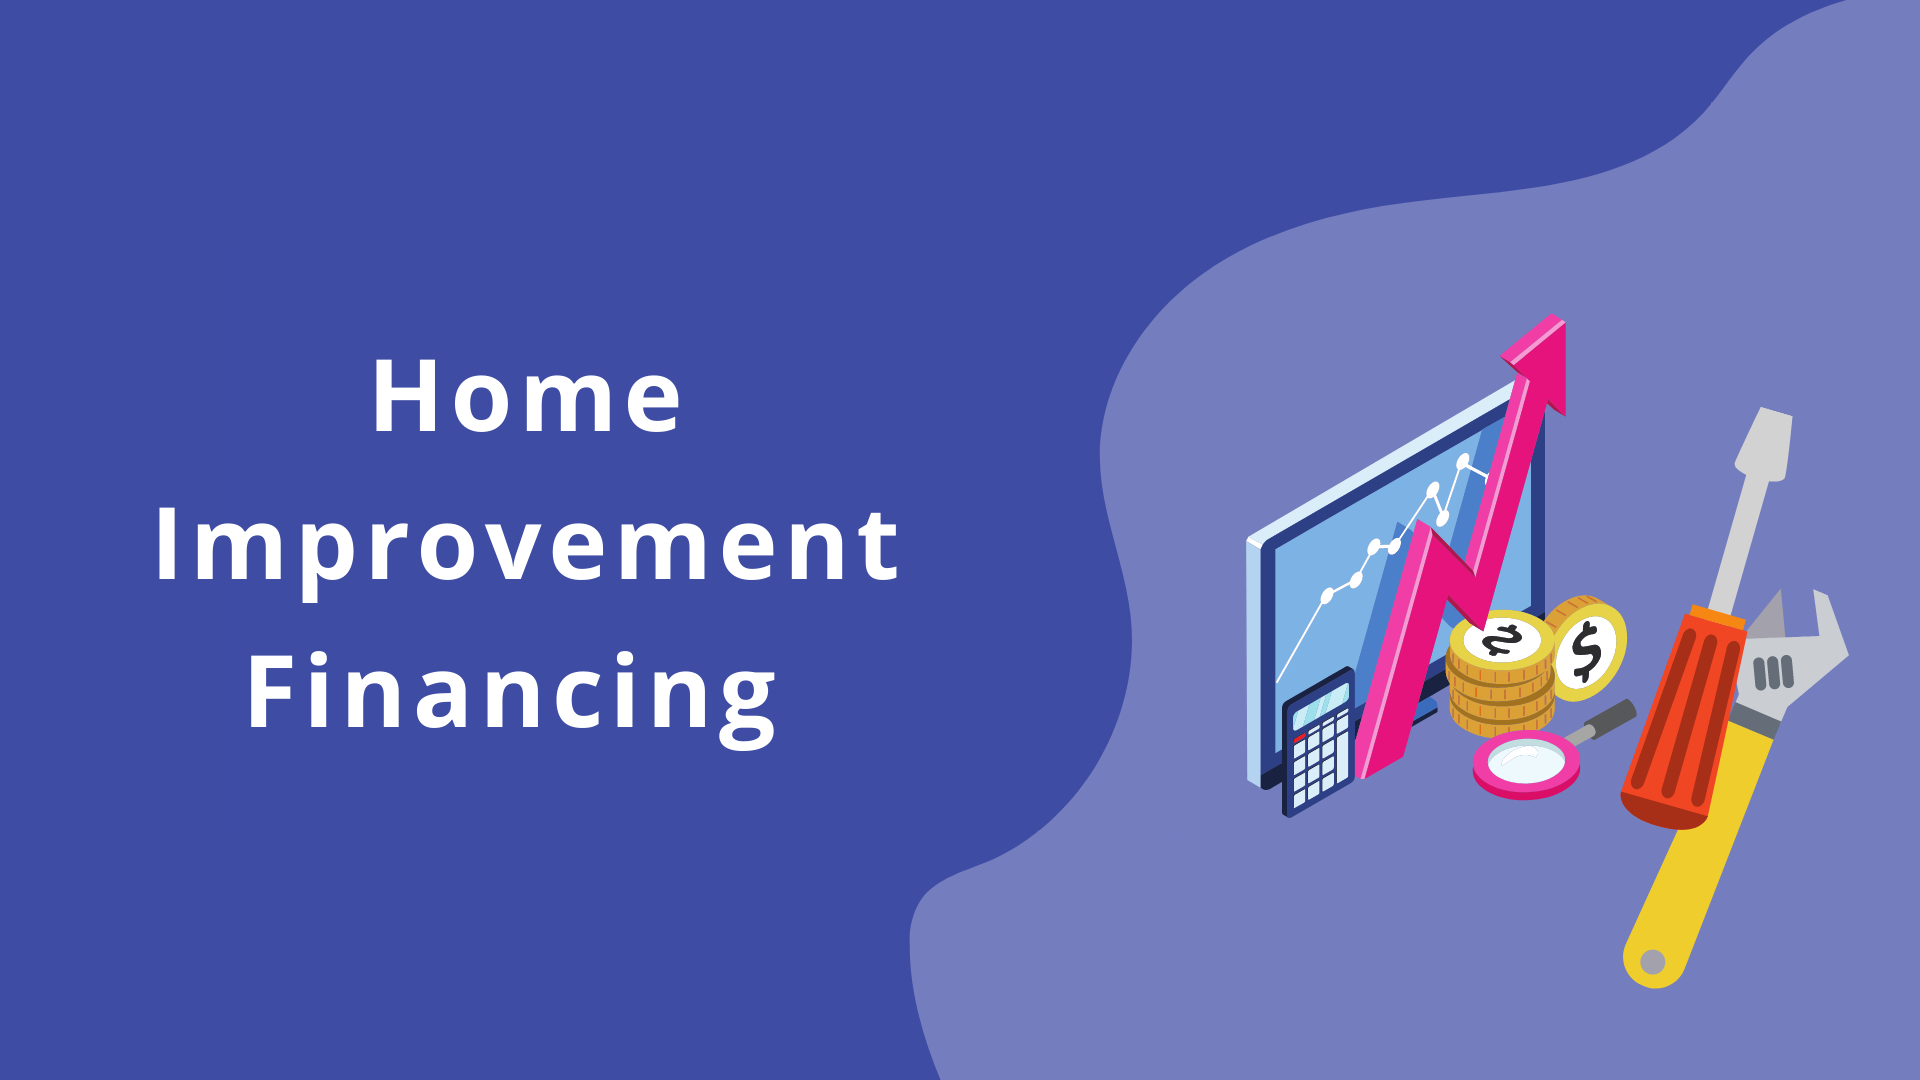 Implementing Home Improvement Financing in Your Company